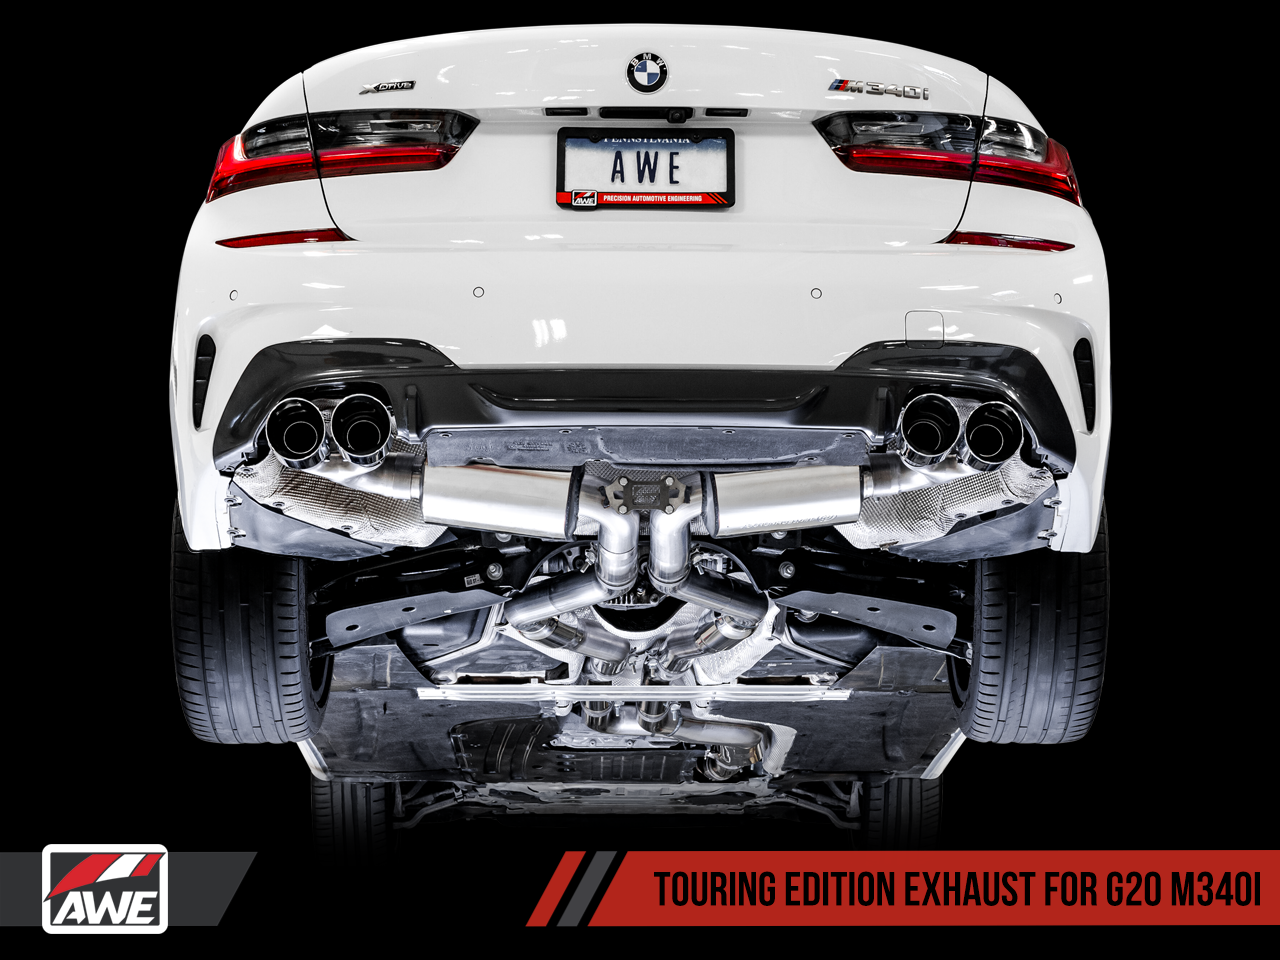 AWE Non-Resonated Touring Edition Exhaust for G20 M340i - Diamond Black Tips